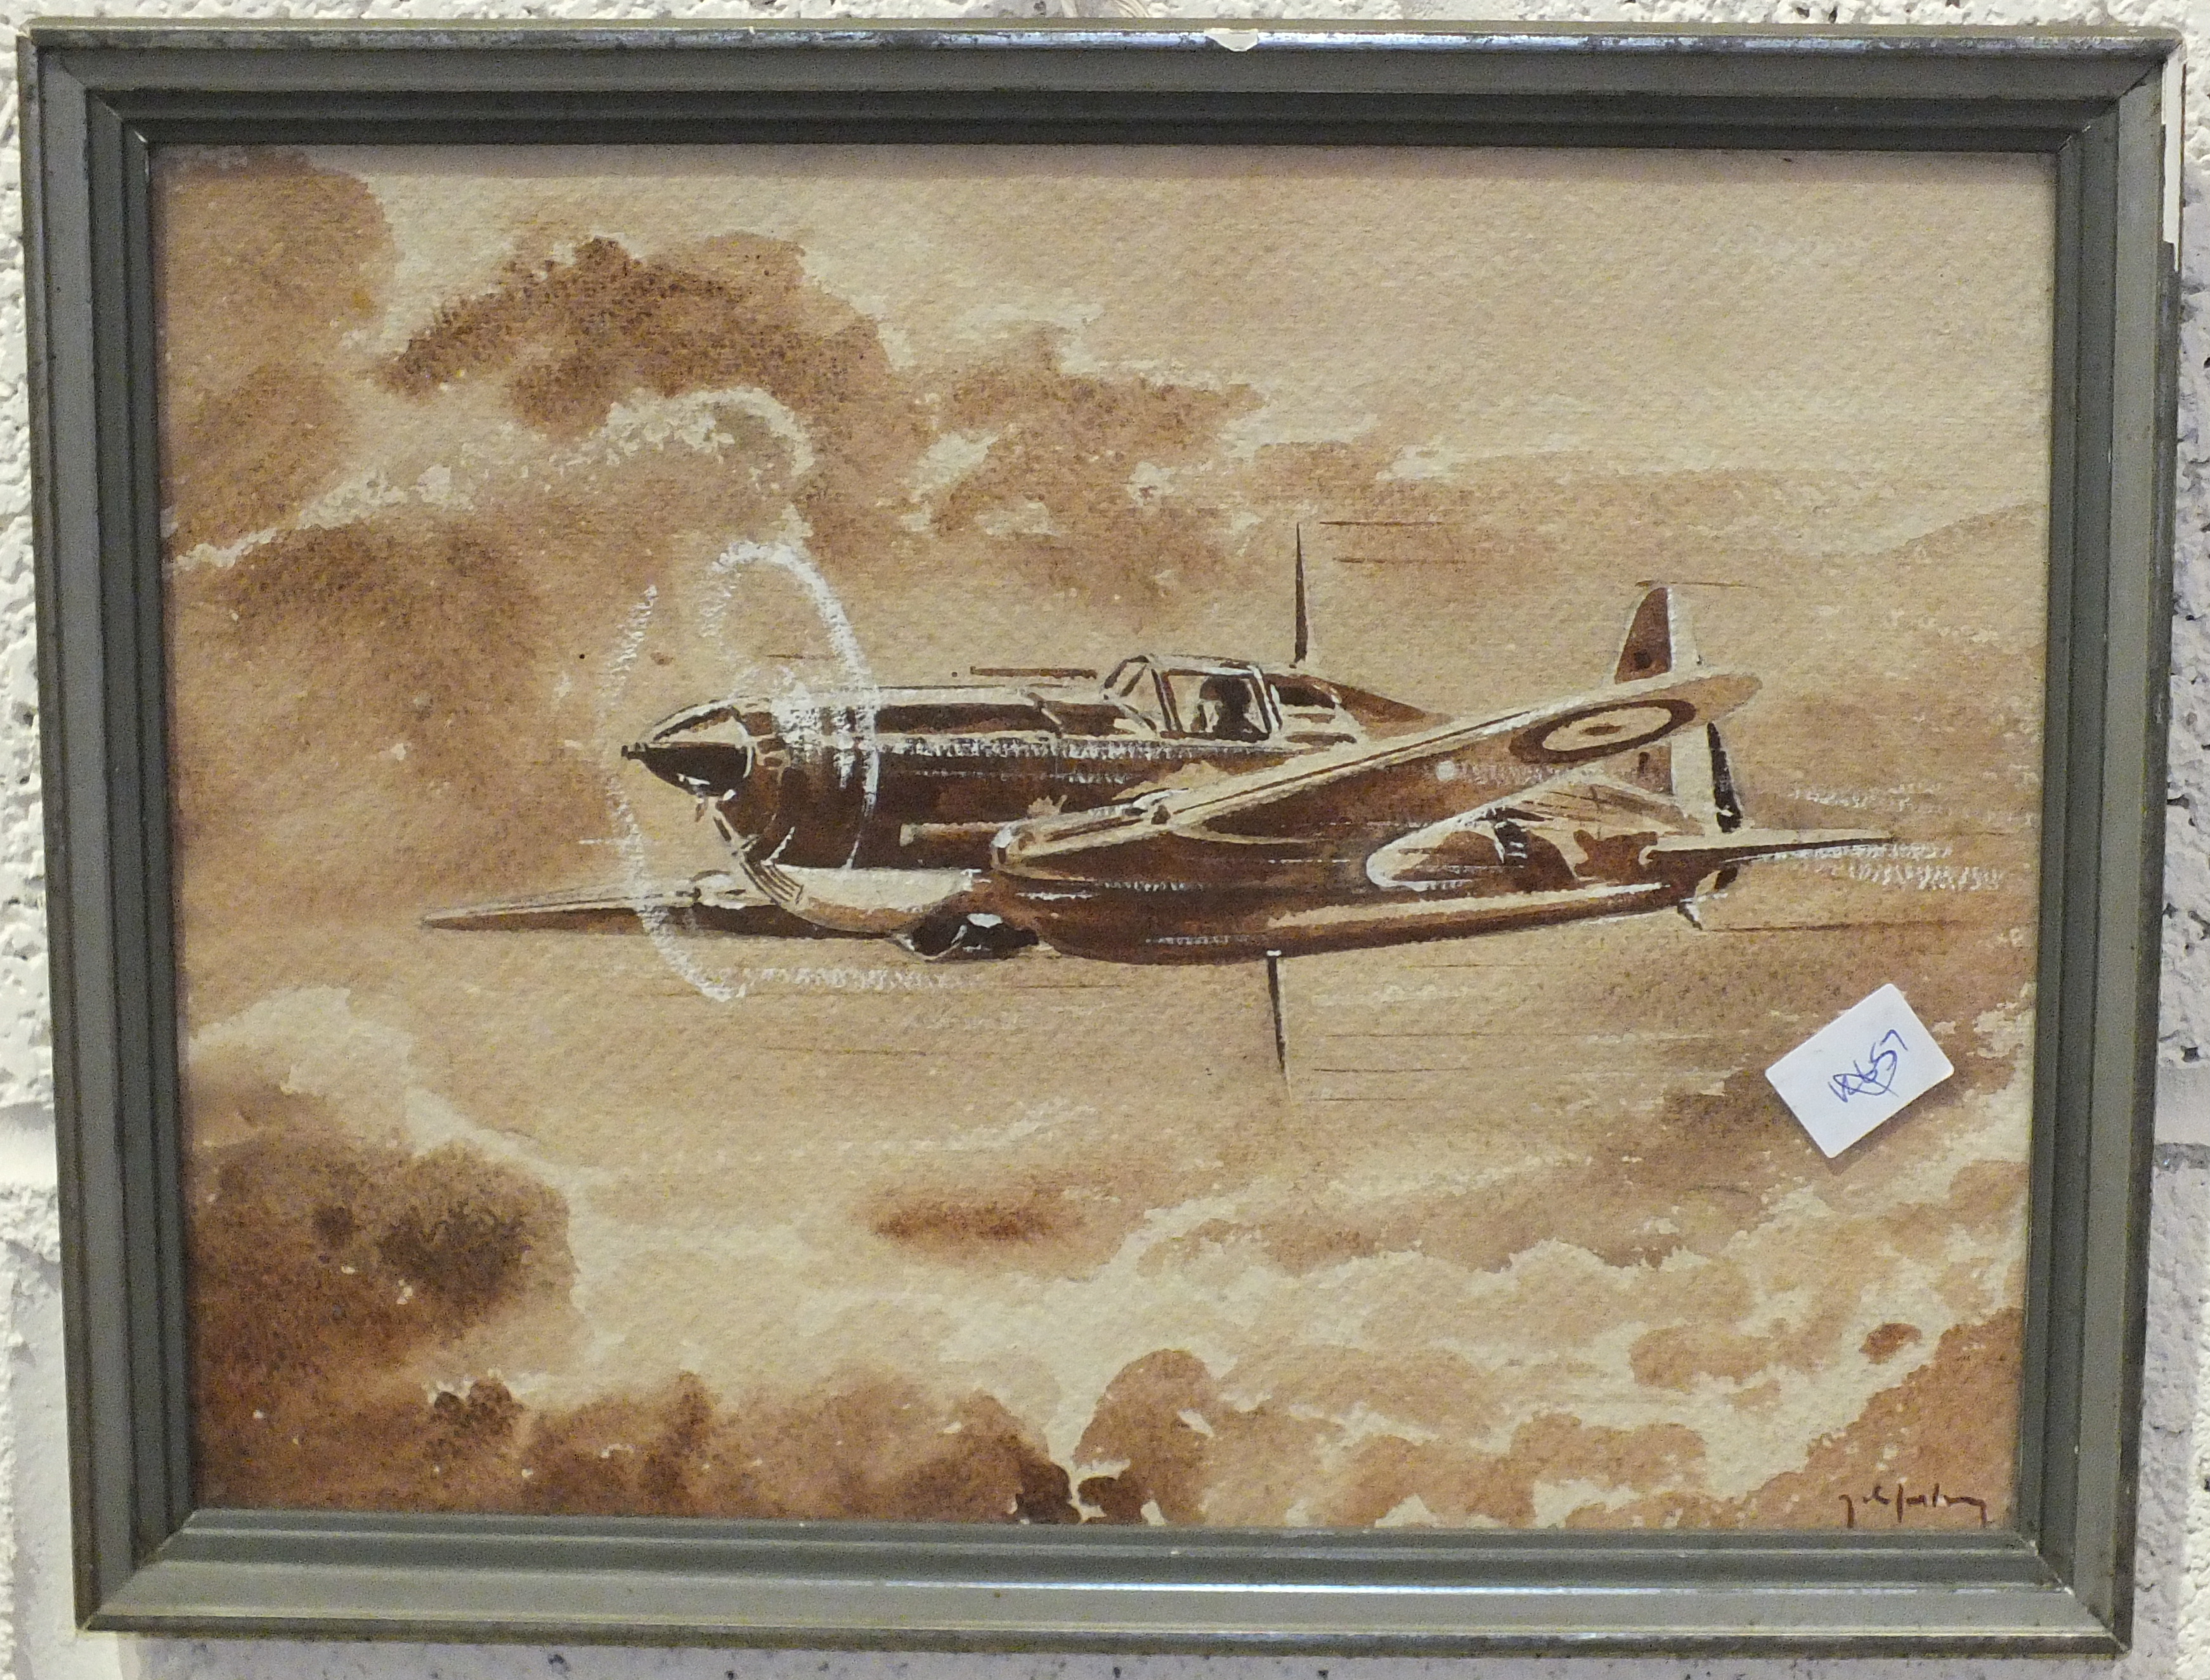 20th century, 'British Aircraft in Flight', sepia, indistinctly-signed, 23.5 x 31cm, another of a - Image 3 of 3